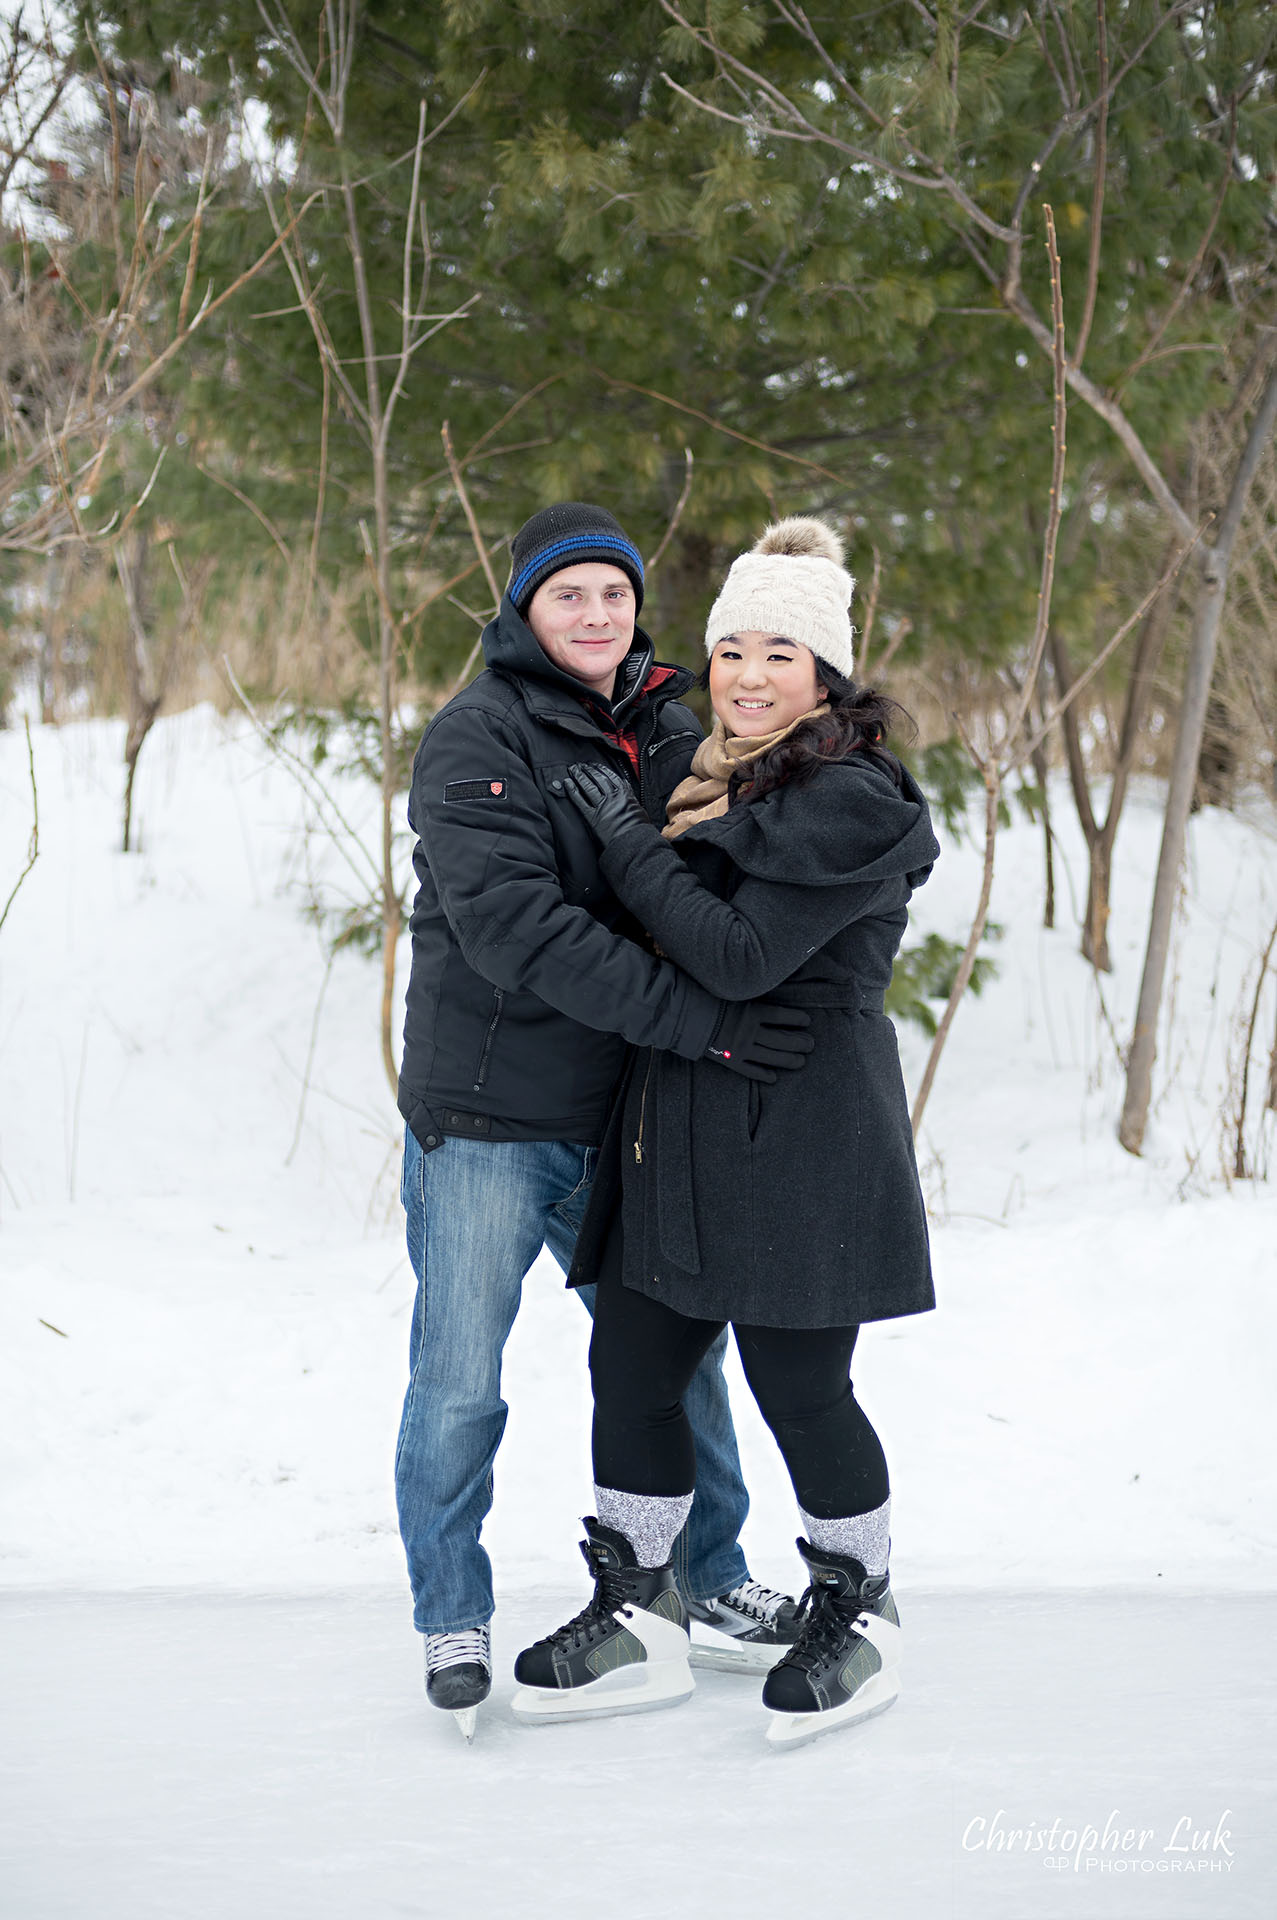 Christopher Luk Toronto Wedding Photographer Ice Skating Trail Winter Engagement Session Natural Photojournalistic Candid Bride Groom Portrait Smile